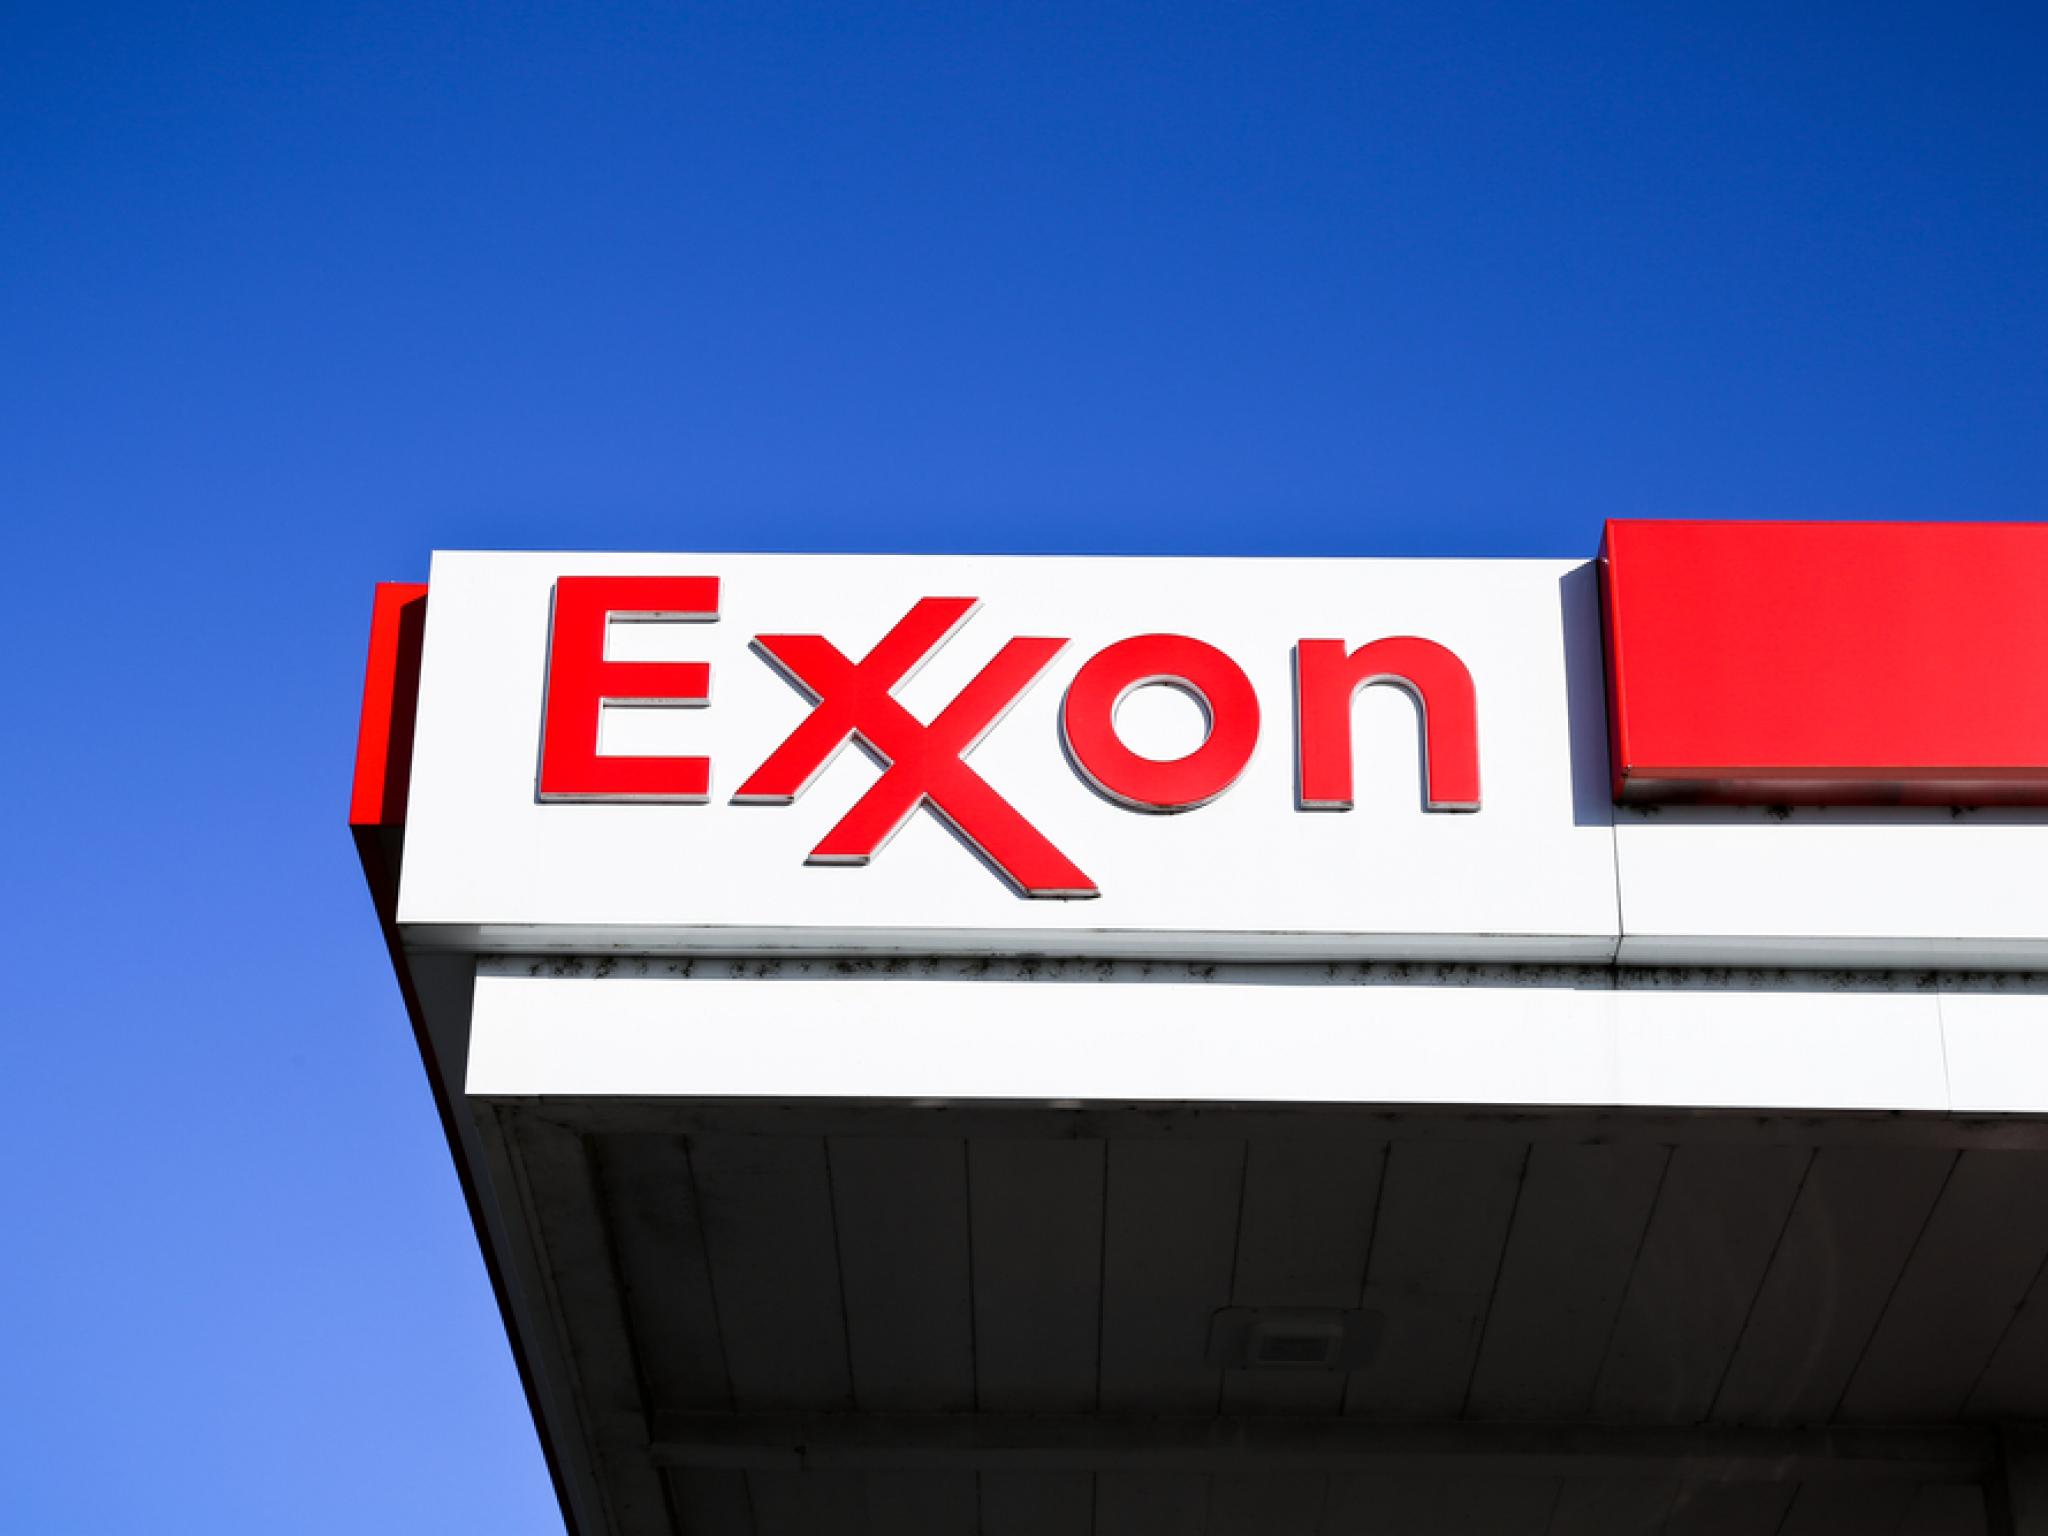  exxon-to-shut-down-two-oil-projects-for-pipeline-connection-report 